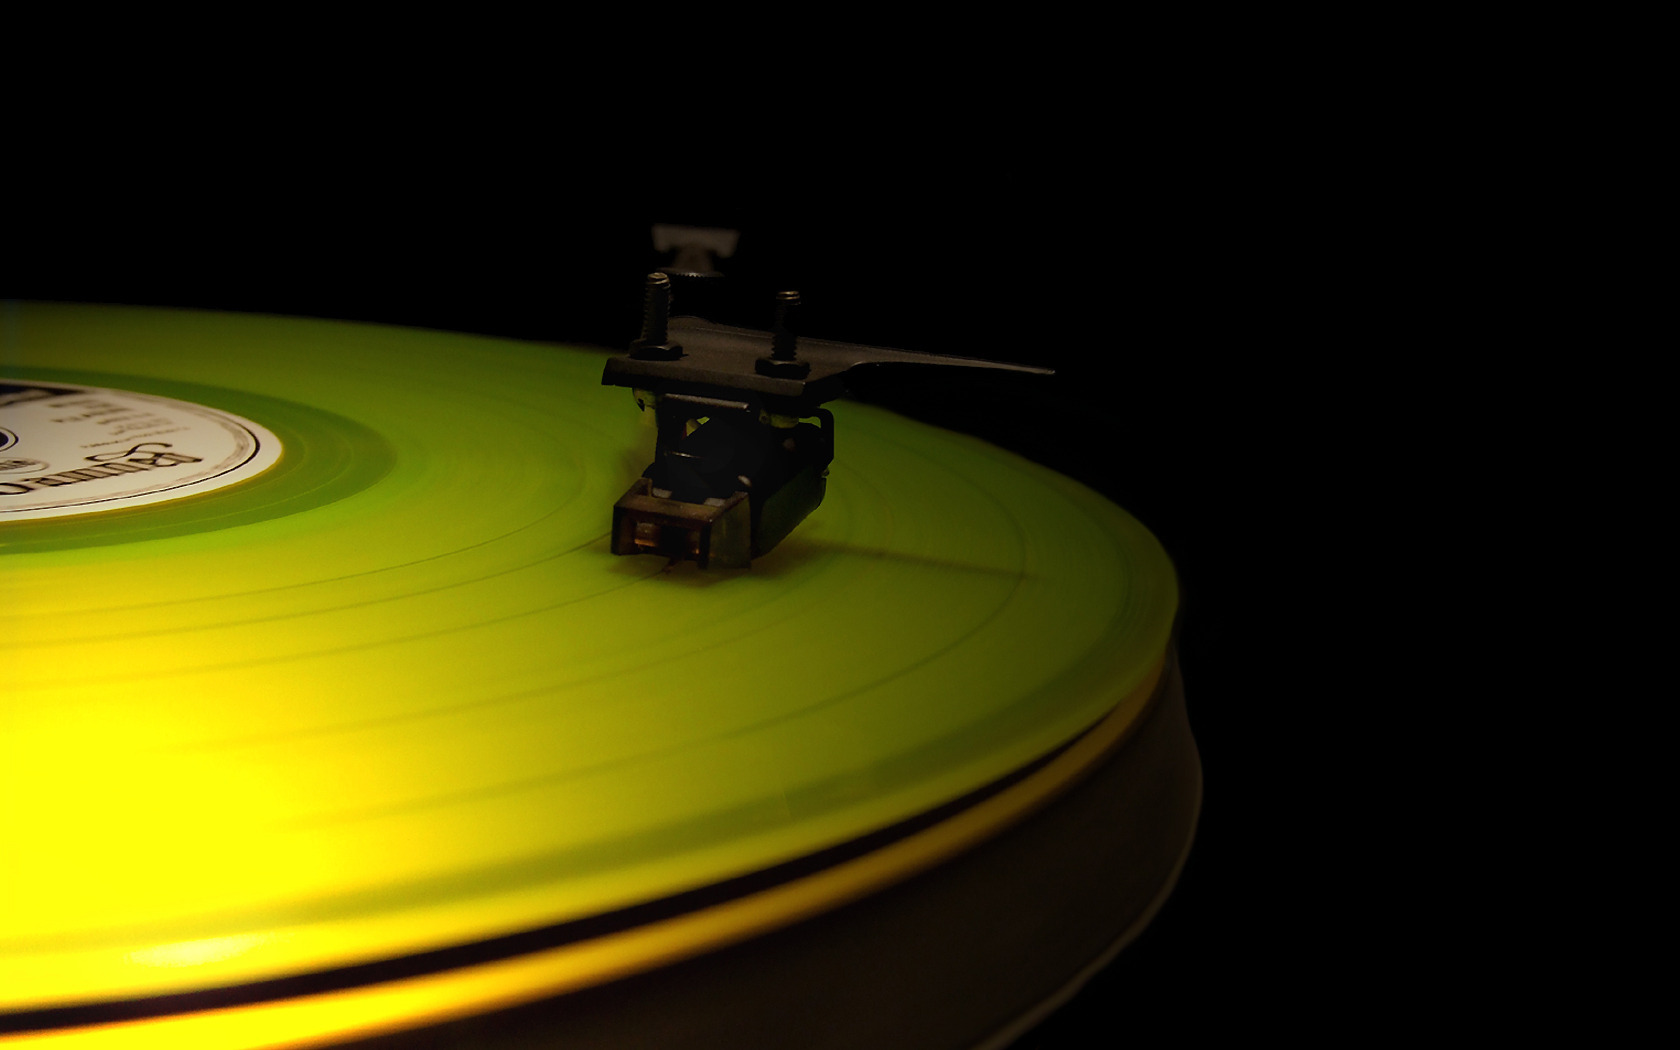 Music Record HD Wallpaper | Background Image